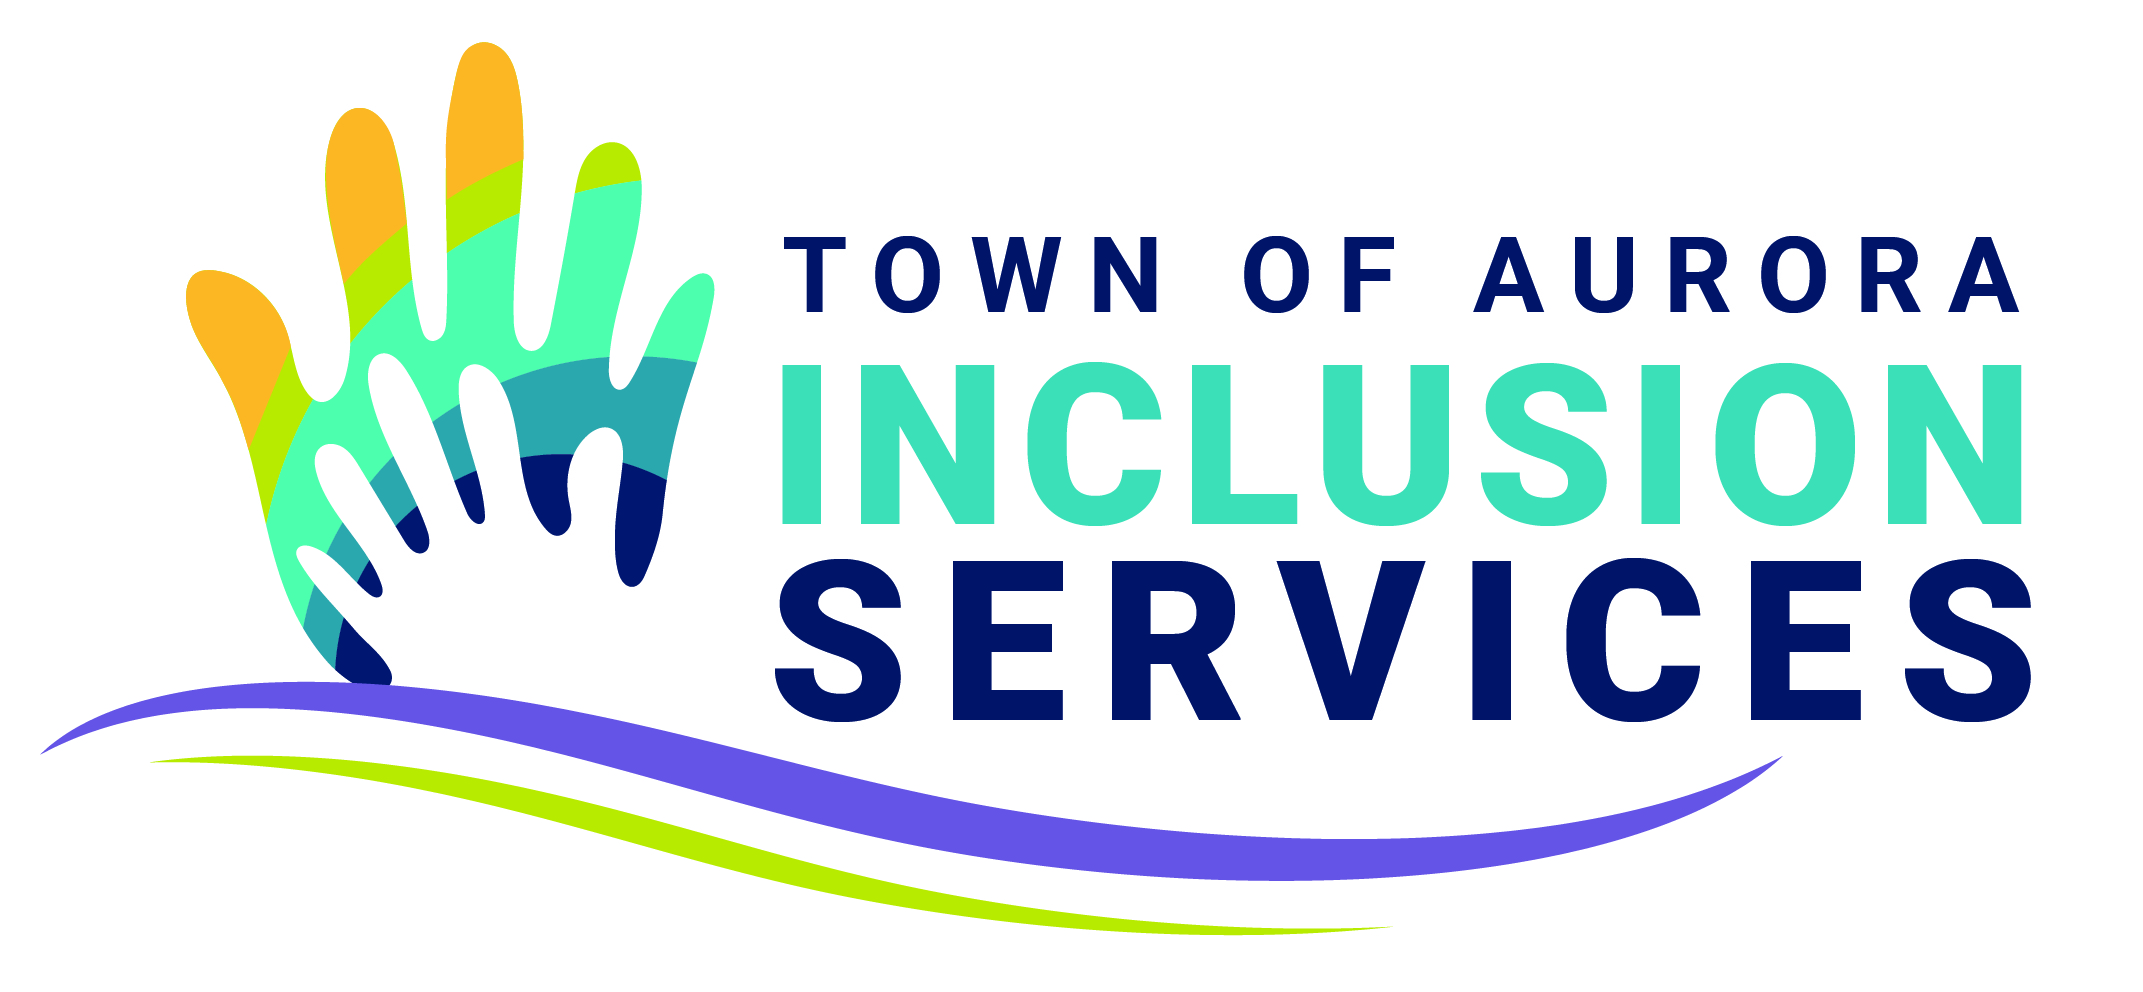 Image of inclusion services logo